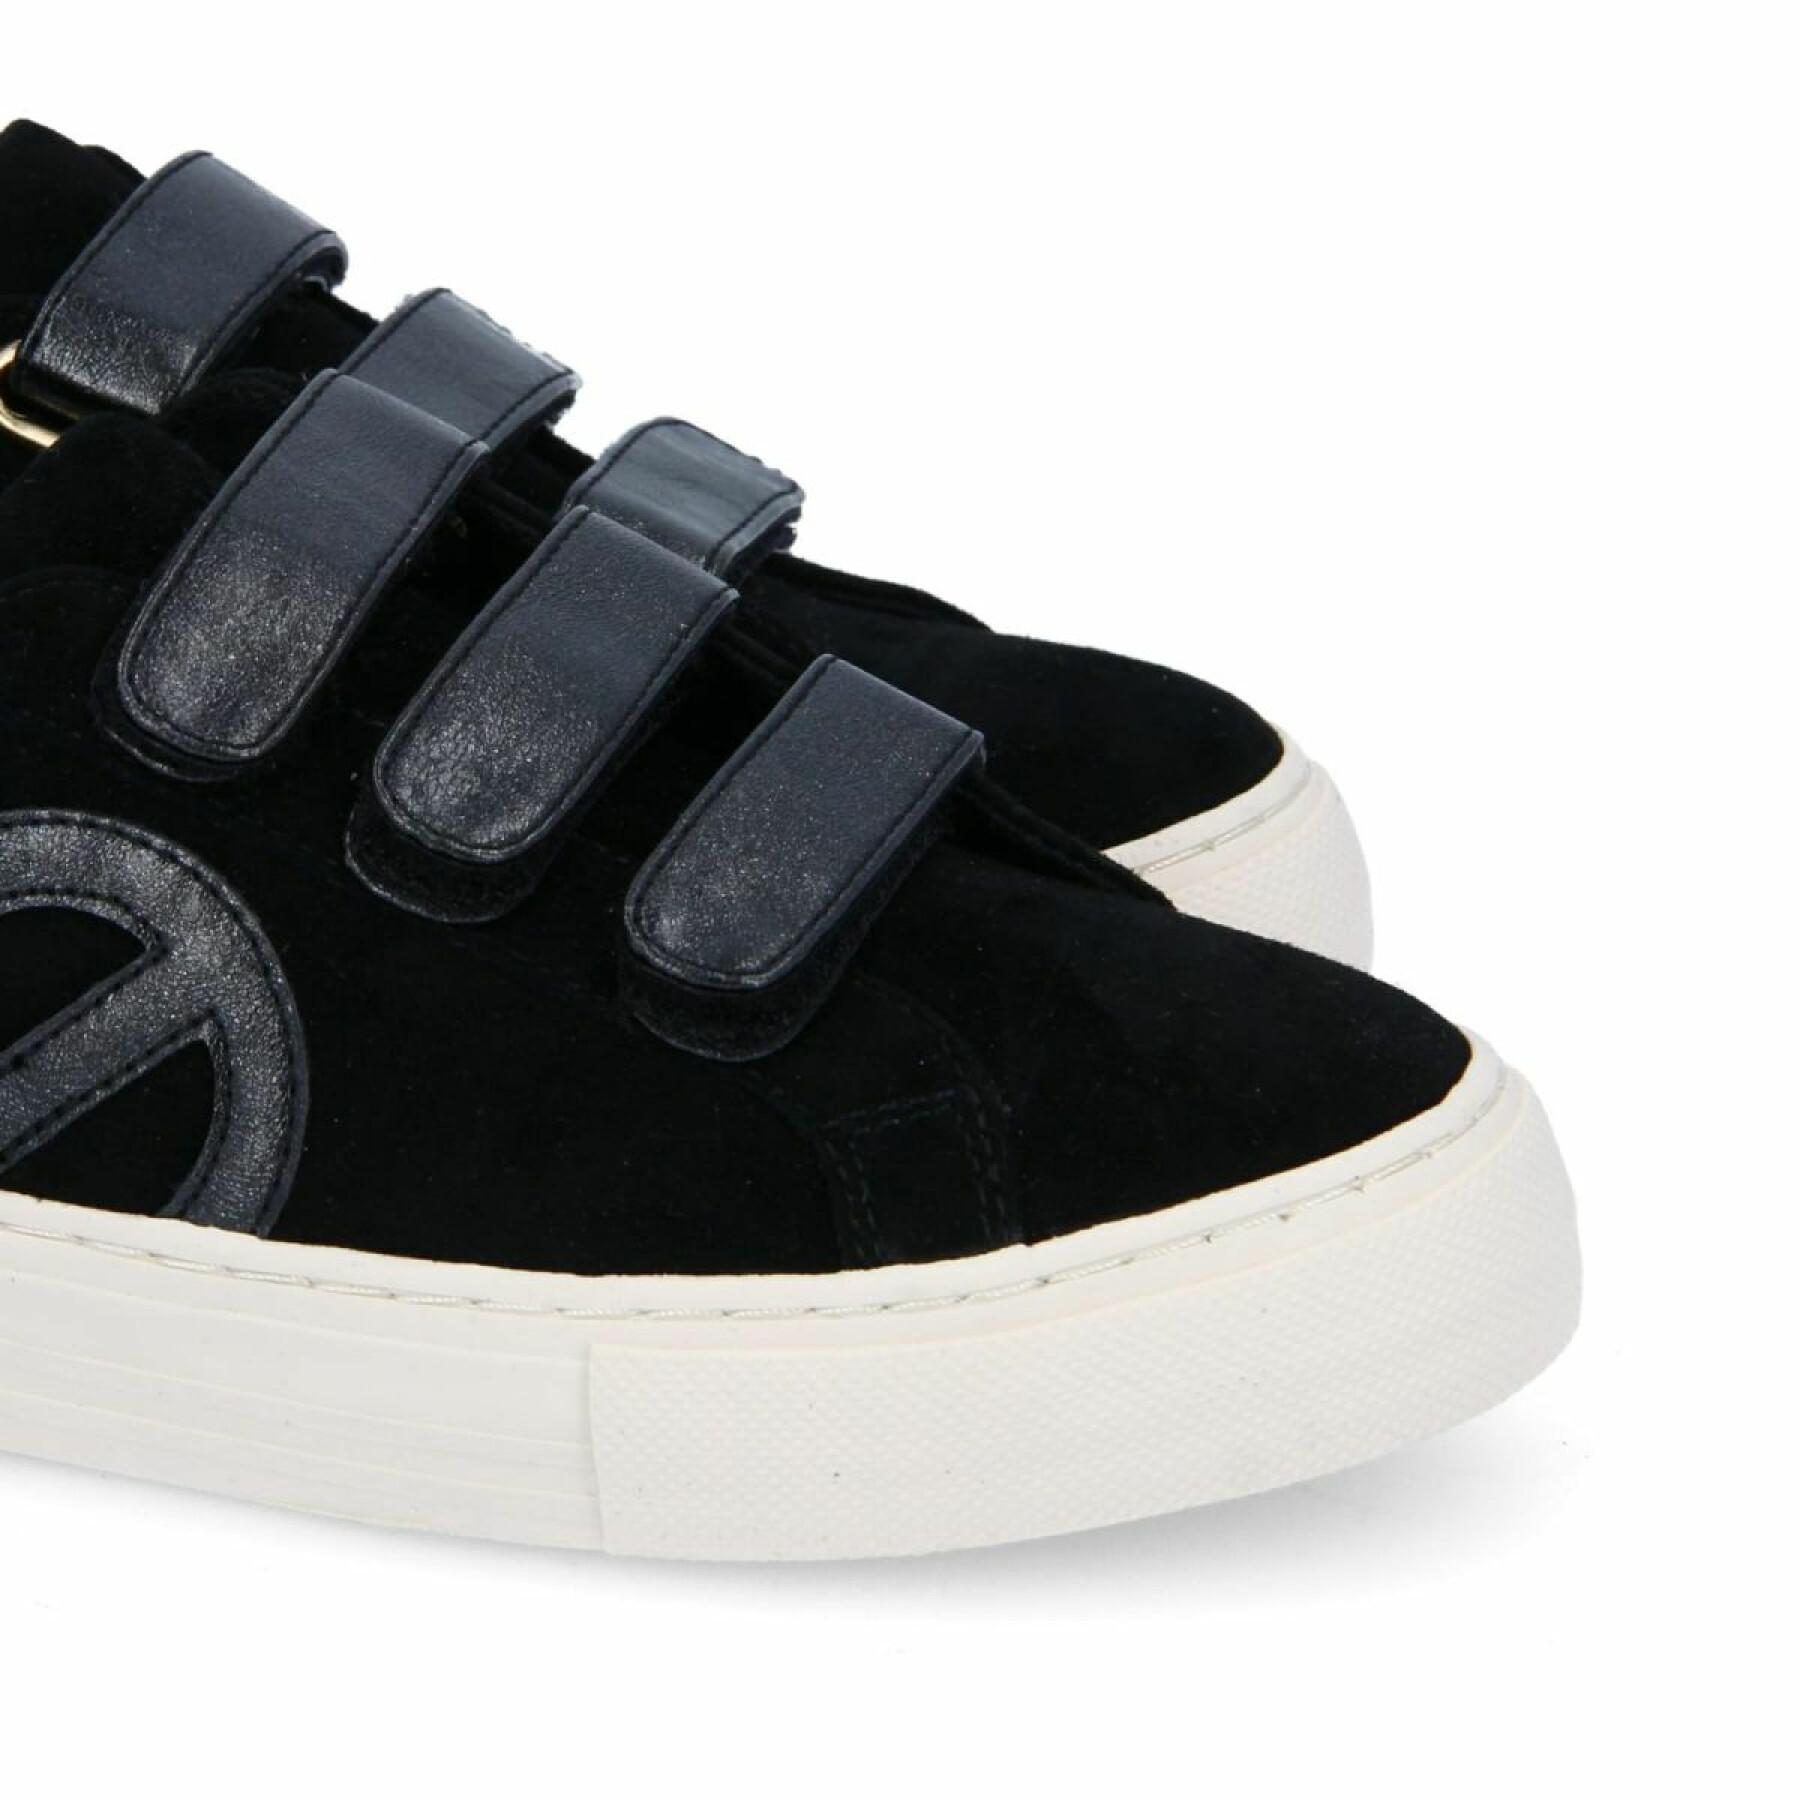 Women's sneakers No Name Arcade Straps Side Master